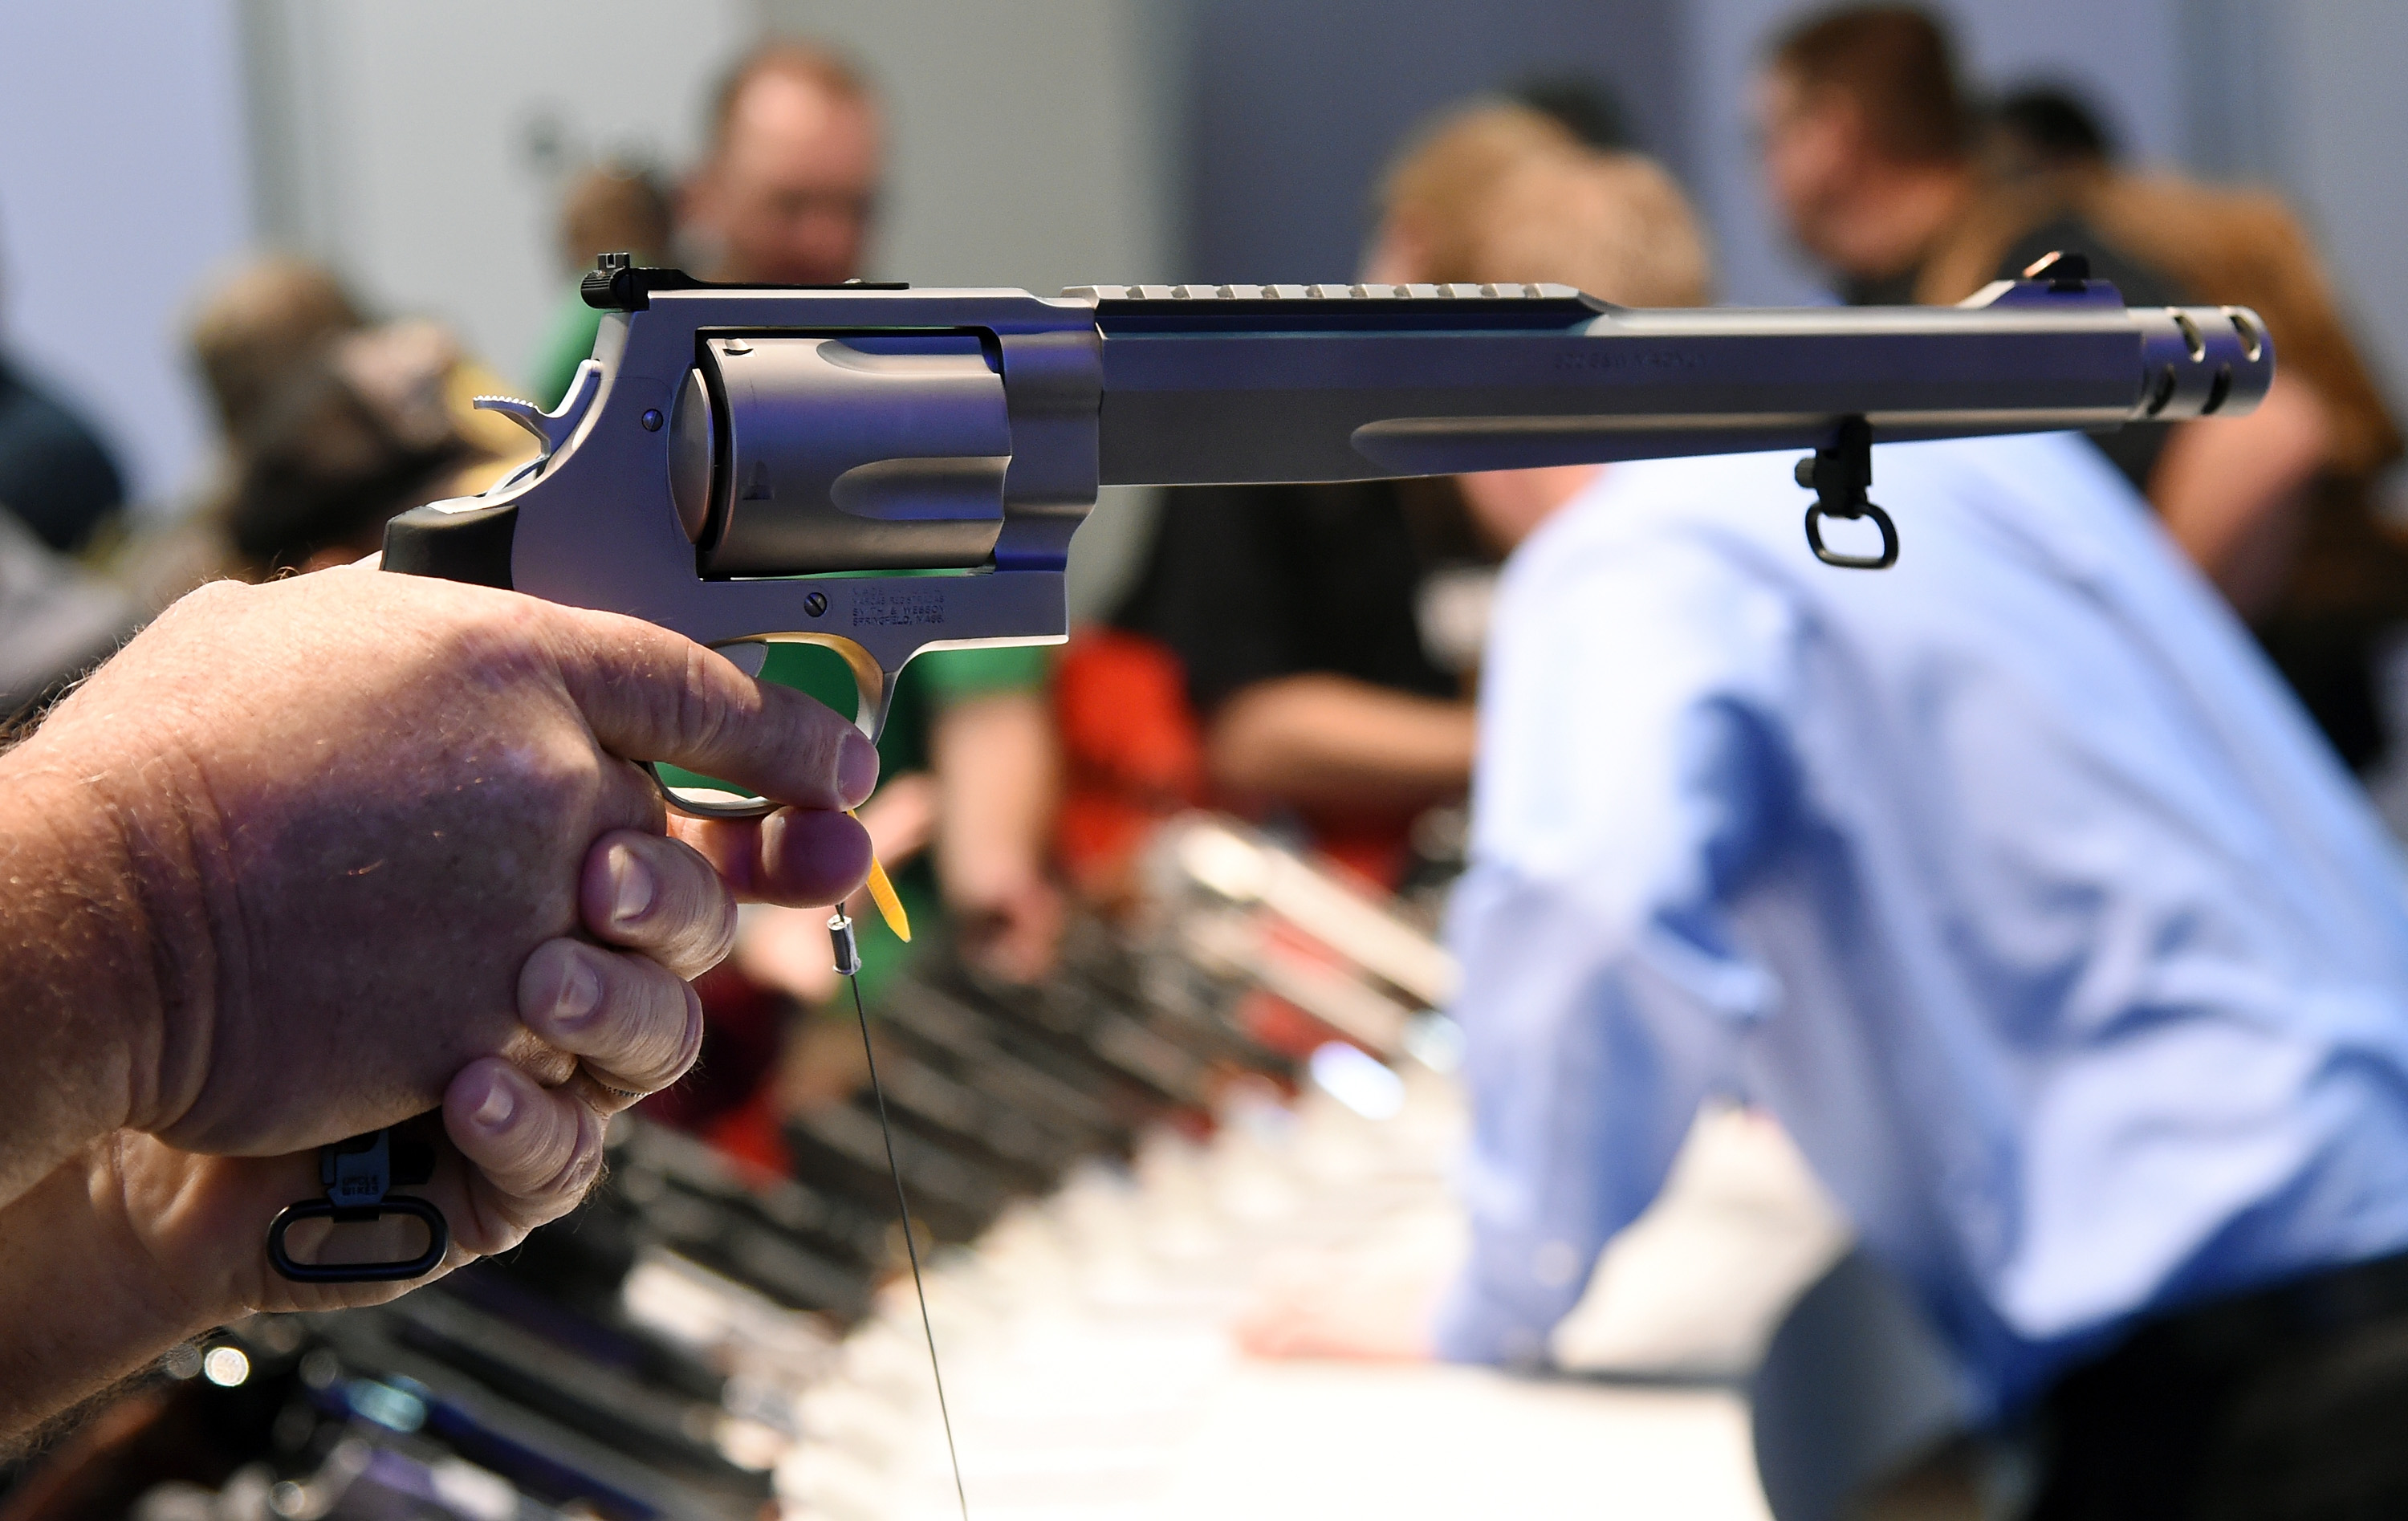 A convention attendee tries out a model S&W500 Magnum 10.5-inch barrel handgun at the Smith & Wesson booth at the 2016 National Shooting Sports Foundation's Shooting, Hunting, Outdoor Trade (SHOT) Show at the Sands Expo and Convention Center on January 19, 2016 in Las Vegas, Nevada. The SHOT Show, the world's largest annual trade show for shooting, hunting and law enforcement professionals, runs through January 23 and is expected to feature 1,600 exhibitors showing off their latest products and services to more than 62,000 attendees. 